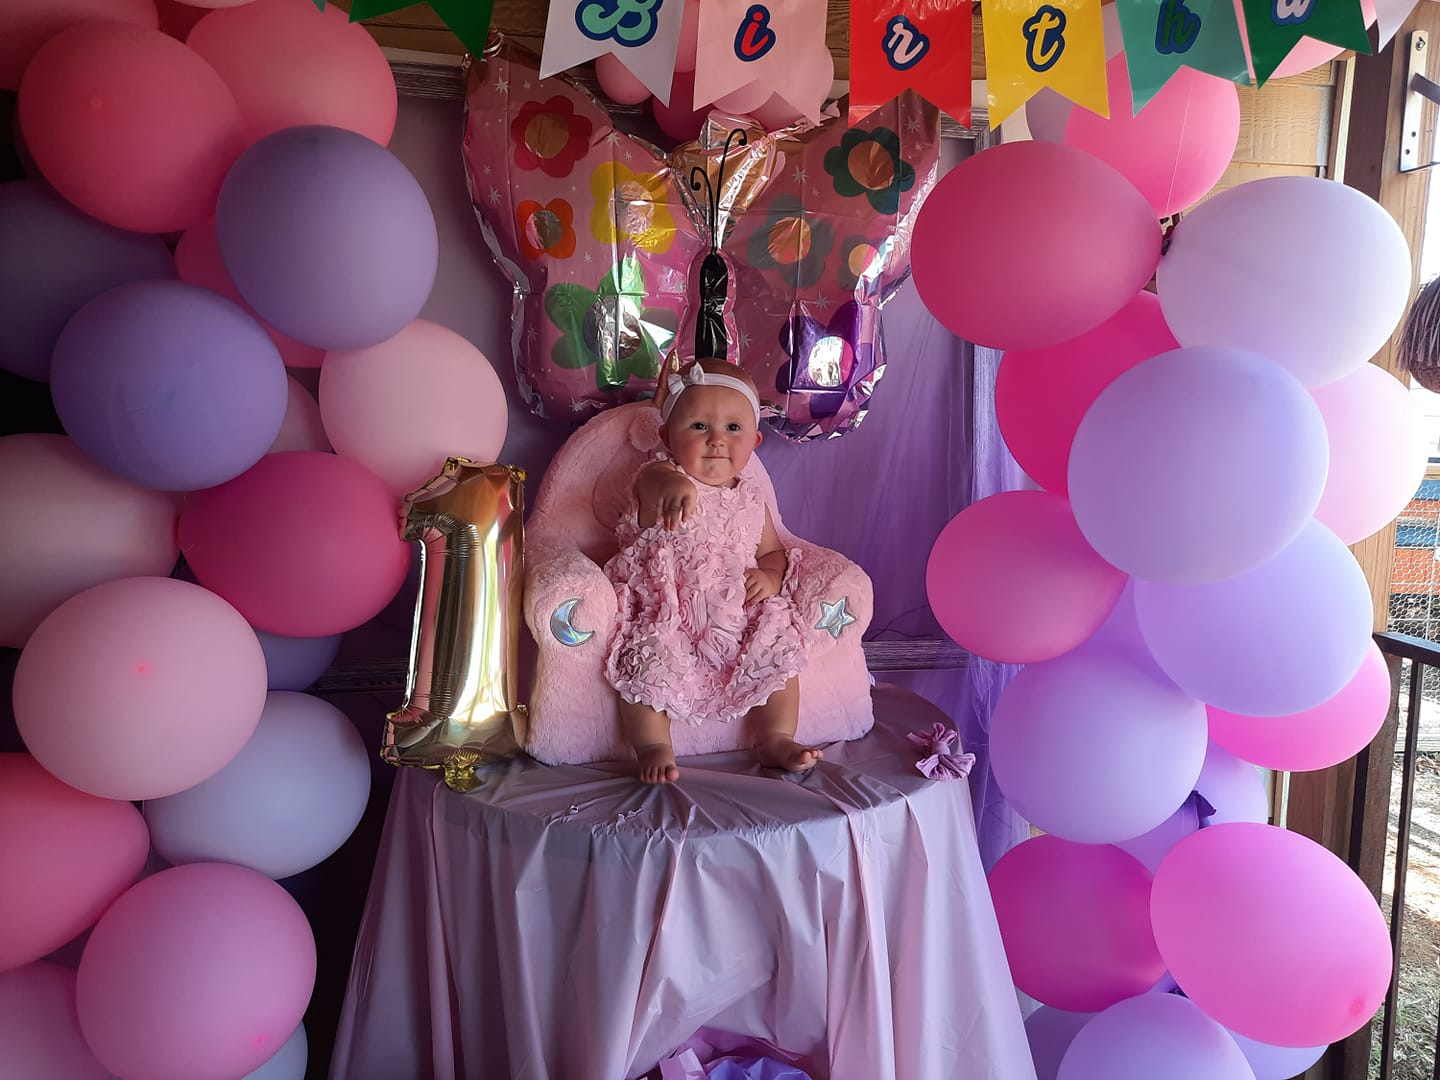 perla hodgkins' tubal reversal baby surrounded by pink balloons at her 1st birthday party